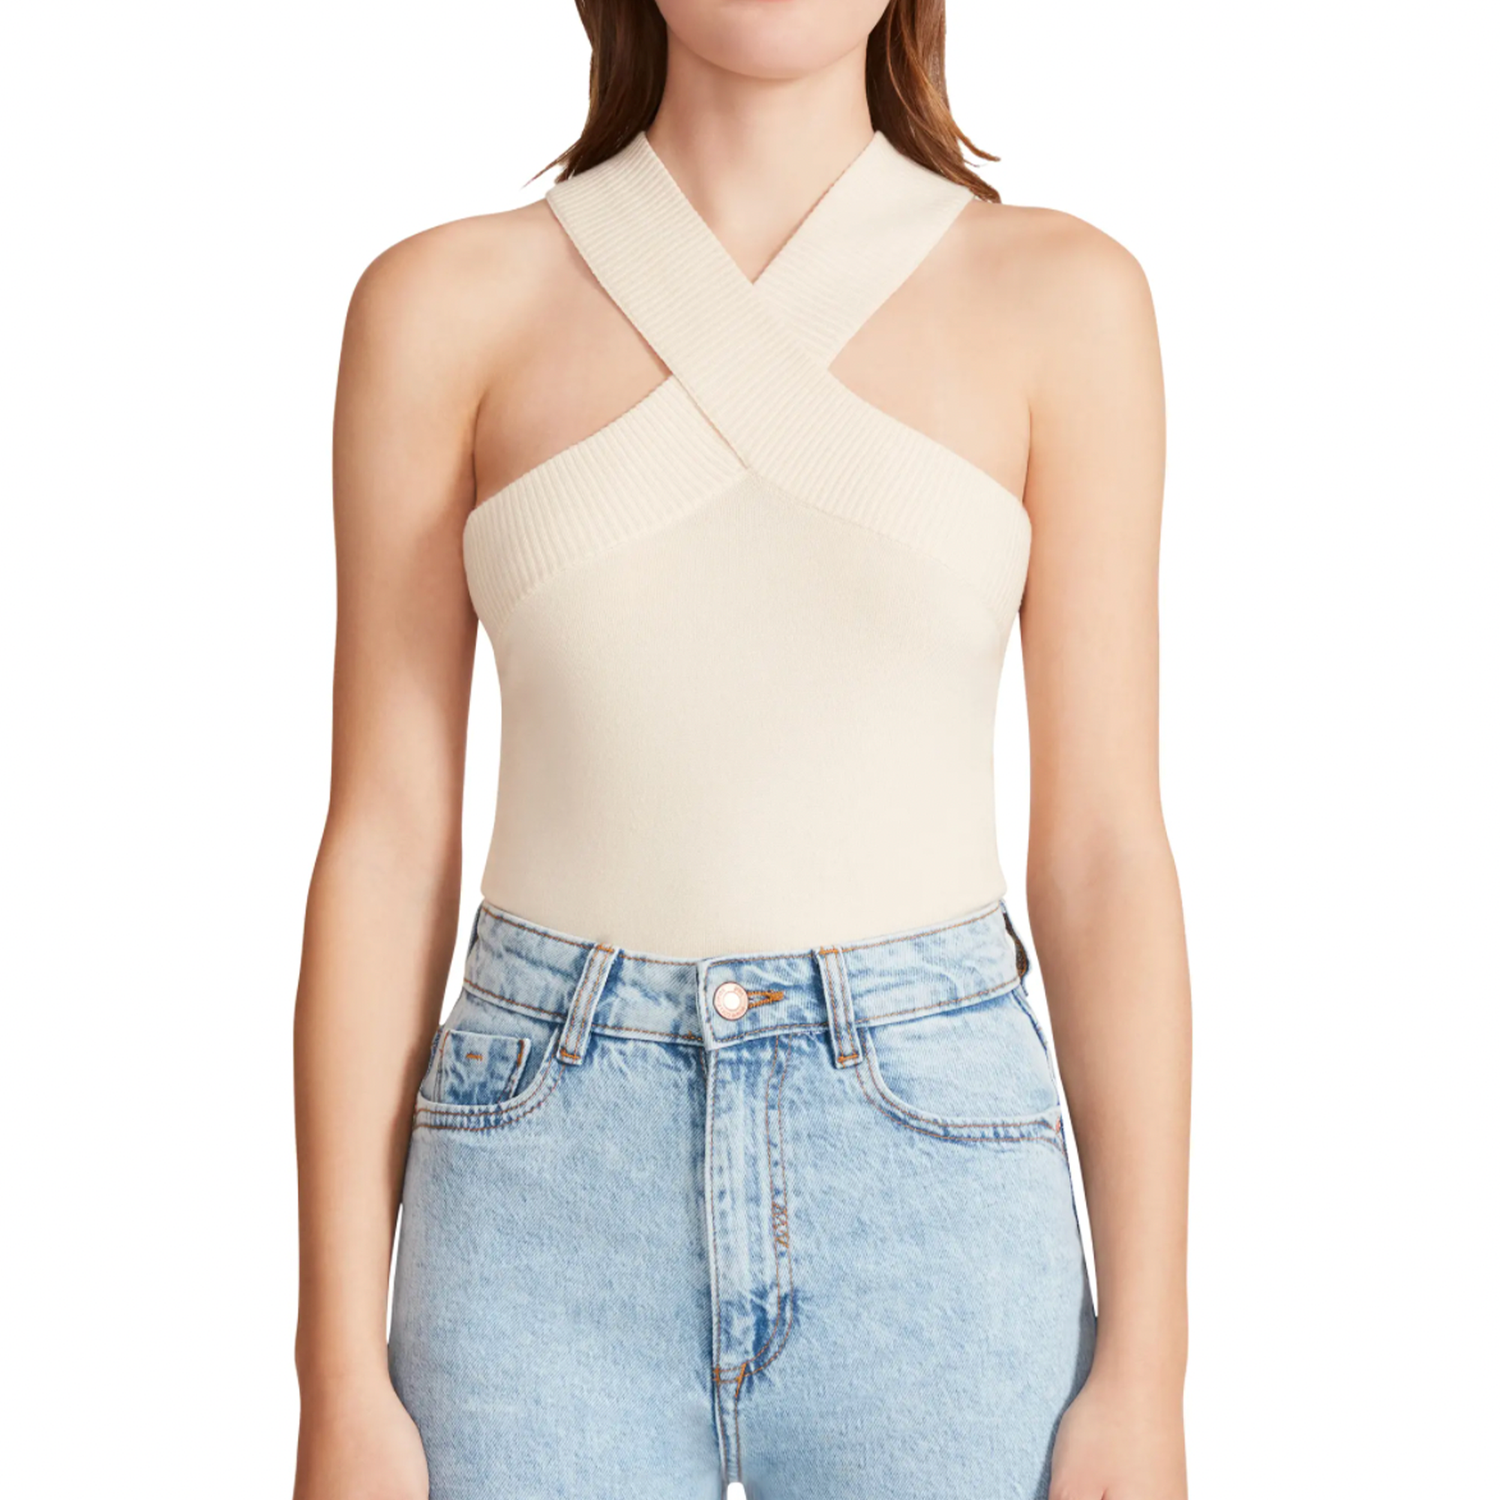 BB Dakota Top Floor Bodysuit. Get a sleek tucked-in look with this sweater tank bodysuit with ribbed straps and cutaway shoulders